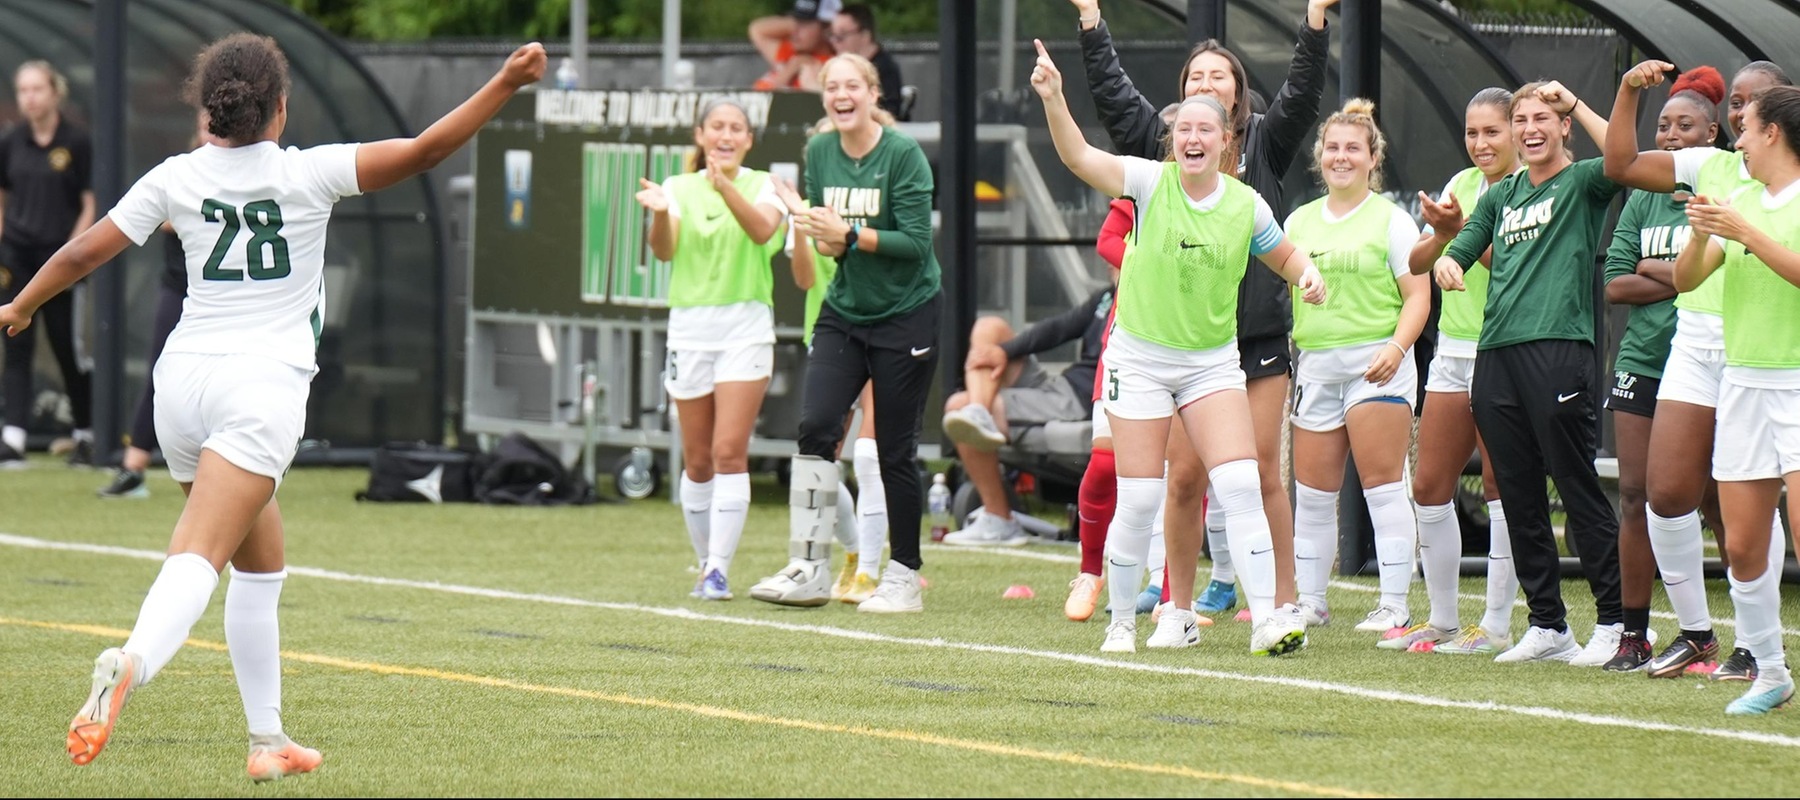 Wilmington University’s Sharon Freire Omonigho #28 celebrates with the team’s coaches and bench after scoring against the Bloomfield College Bears during their NCAA Women’s soccer match at the Wilmington University Sports complex in Newark, Delaware, September 30, 2023. Photo By Giovanni Badalamenti